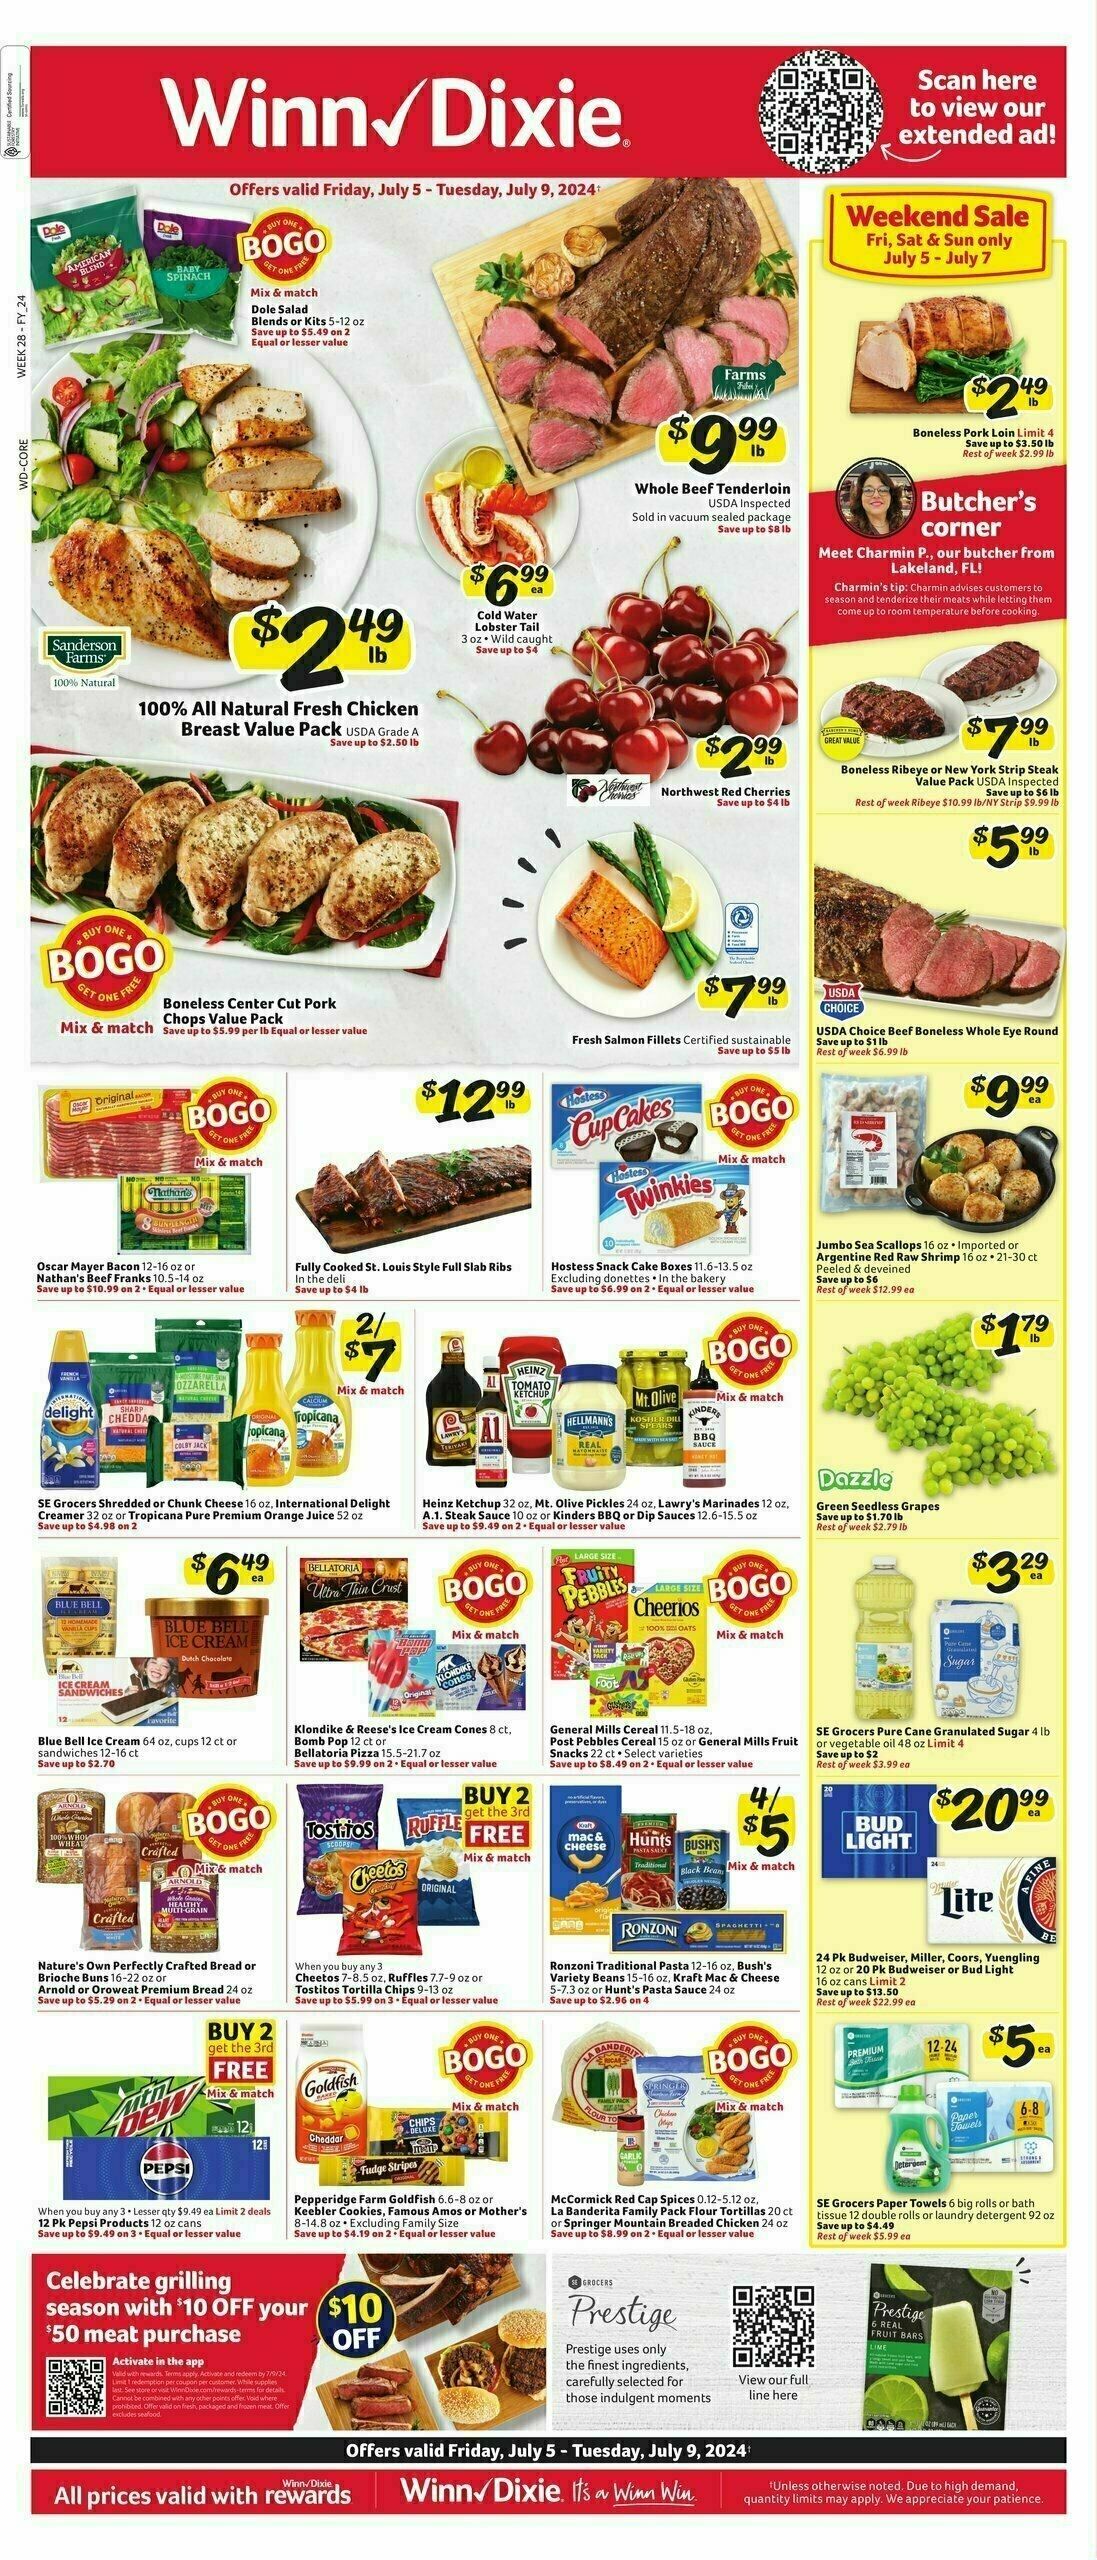 Winn-Dixie Weekly Ad from July 5